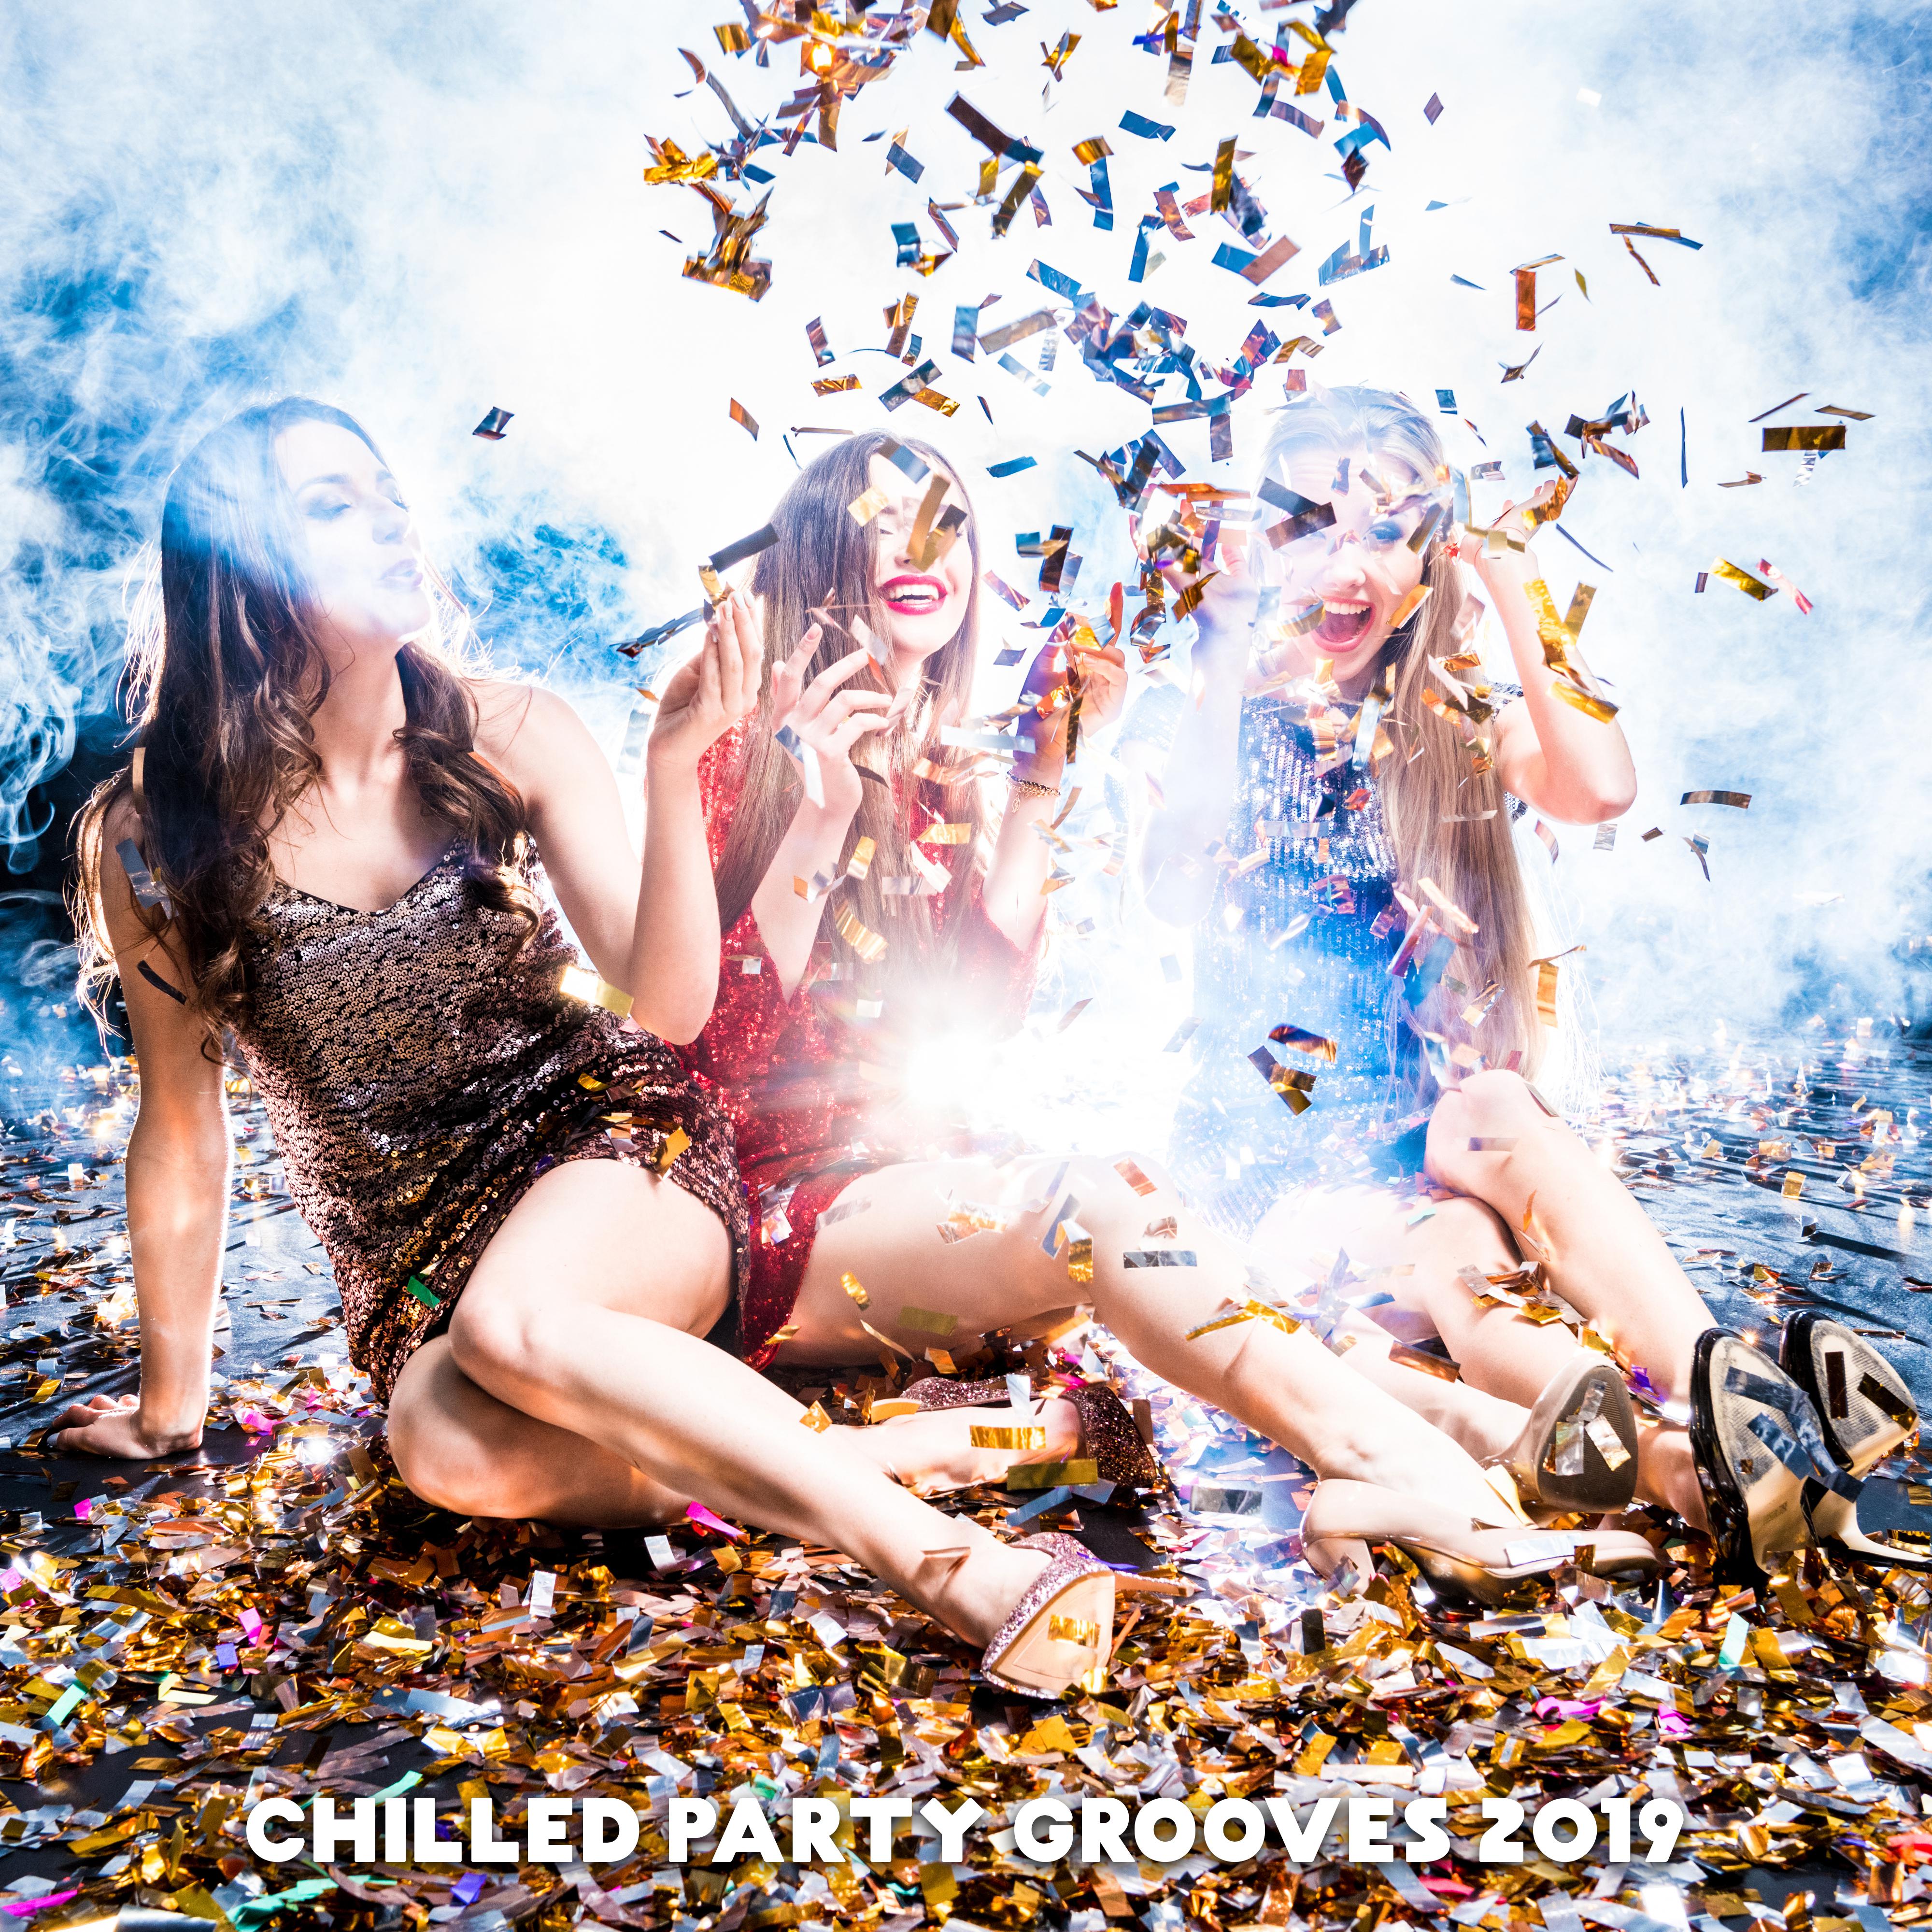 Chilled Party Grooves 2019: Chillout Fresh Beats Compilation, Energetic Slow Music for Drink Party with Friends, Summer Time Celebration Vibes